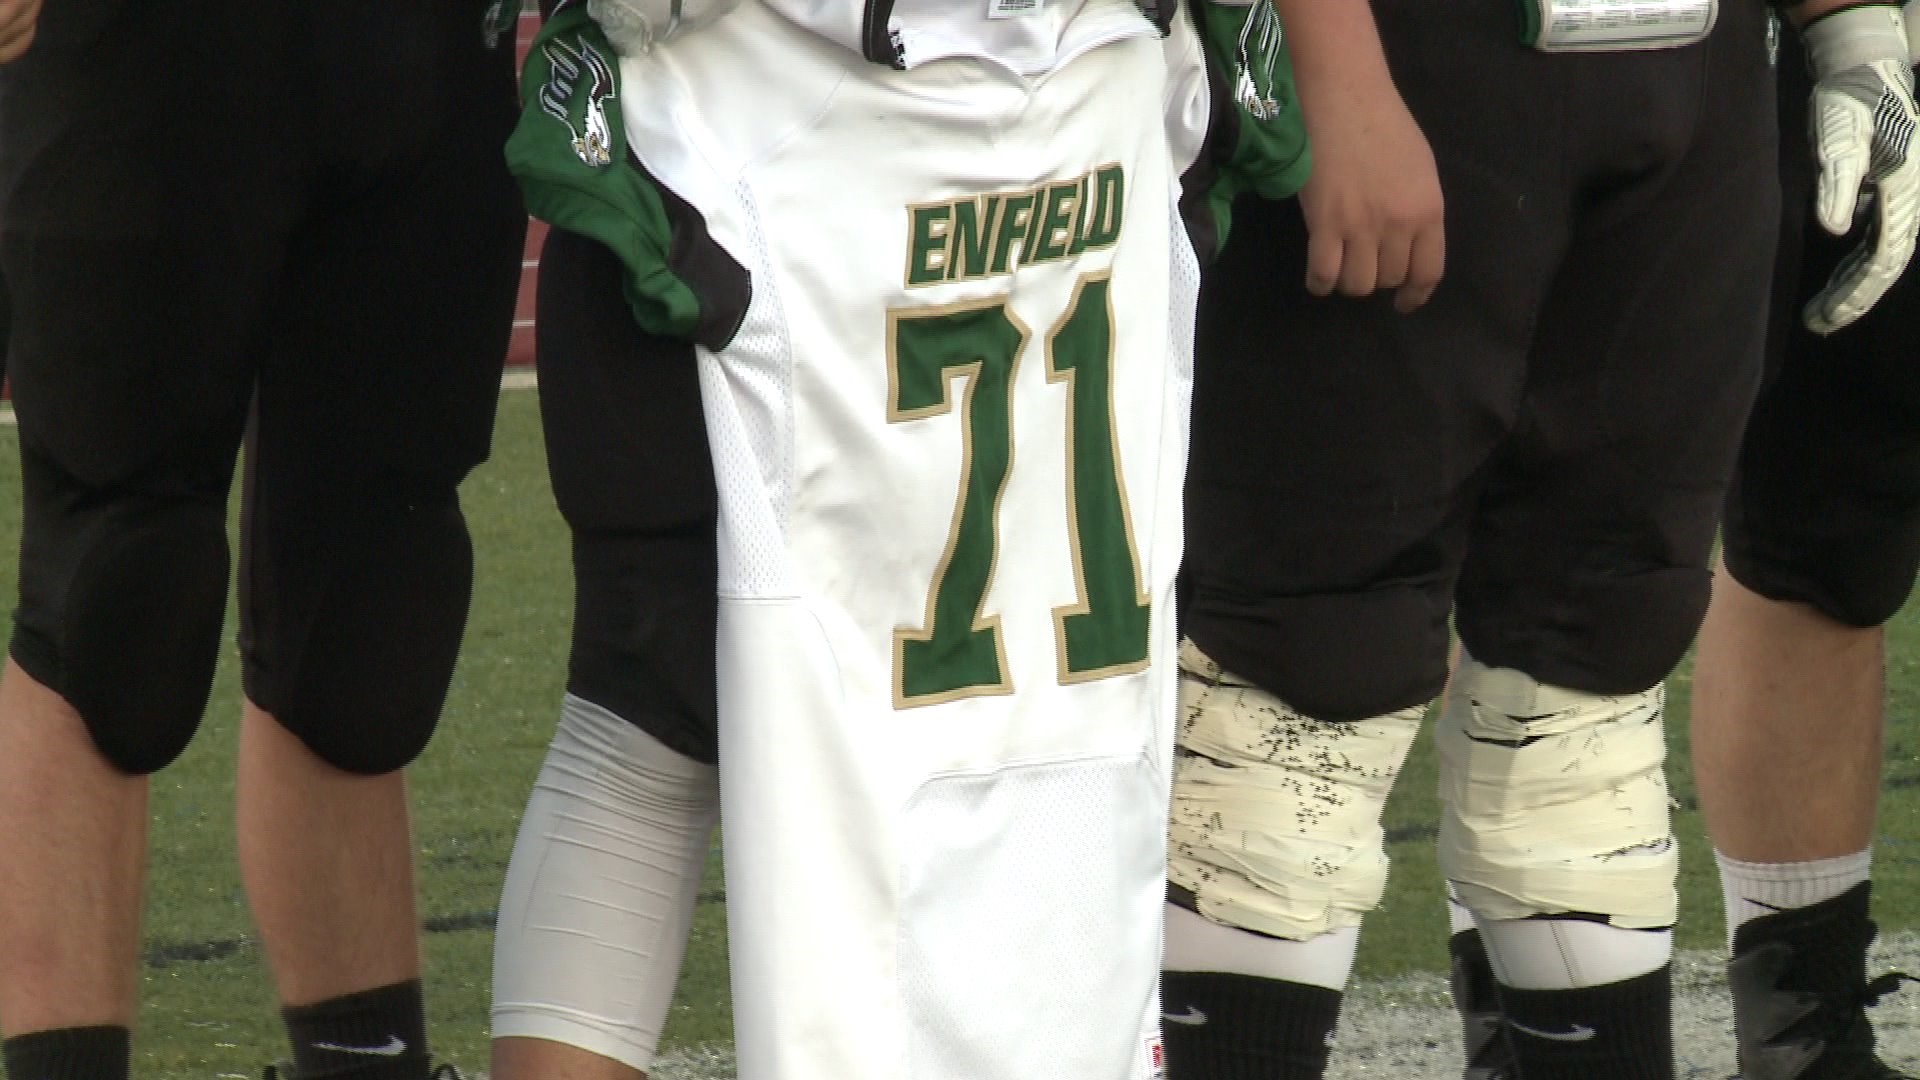 MOMENT OF SILENCE FOR ENFIELD TEEN